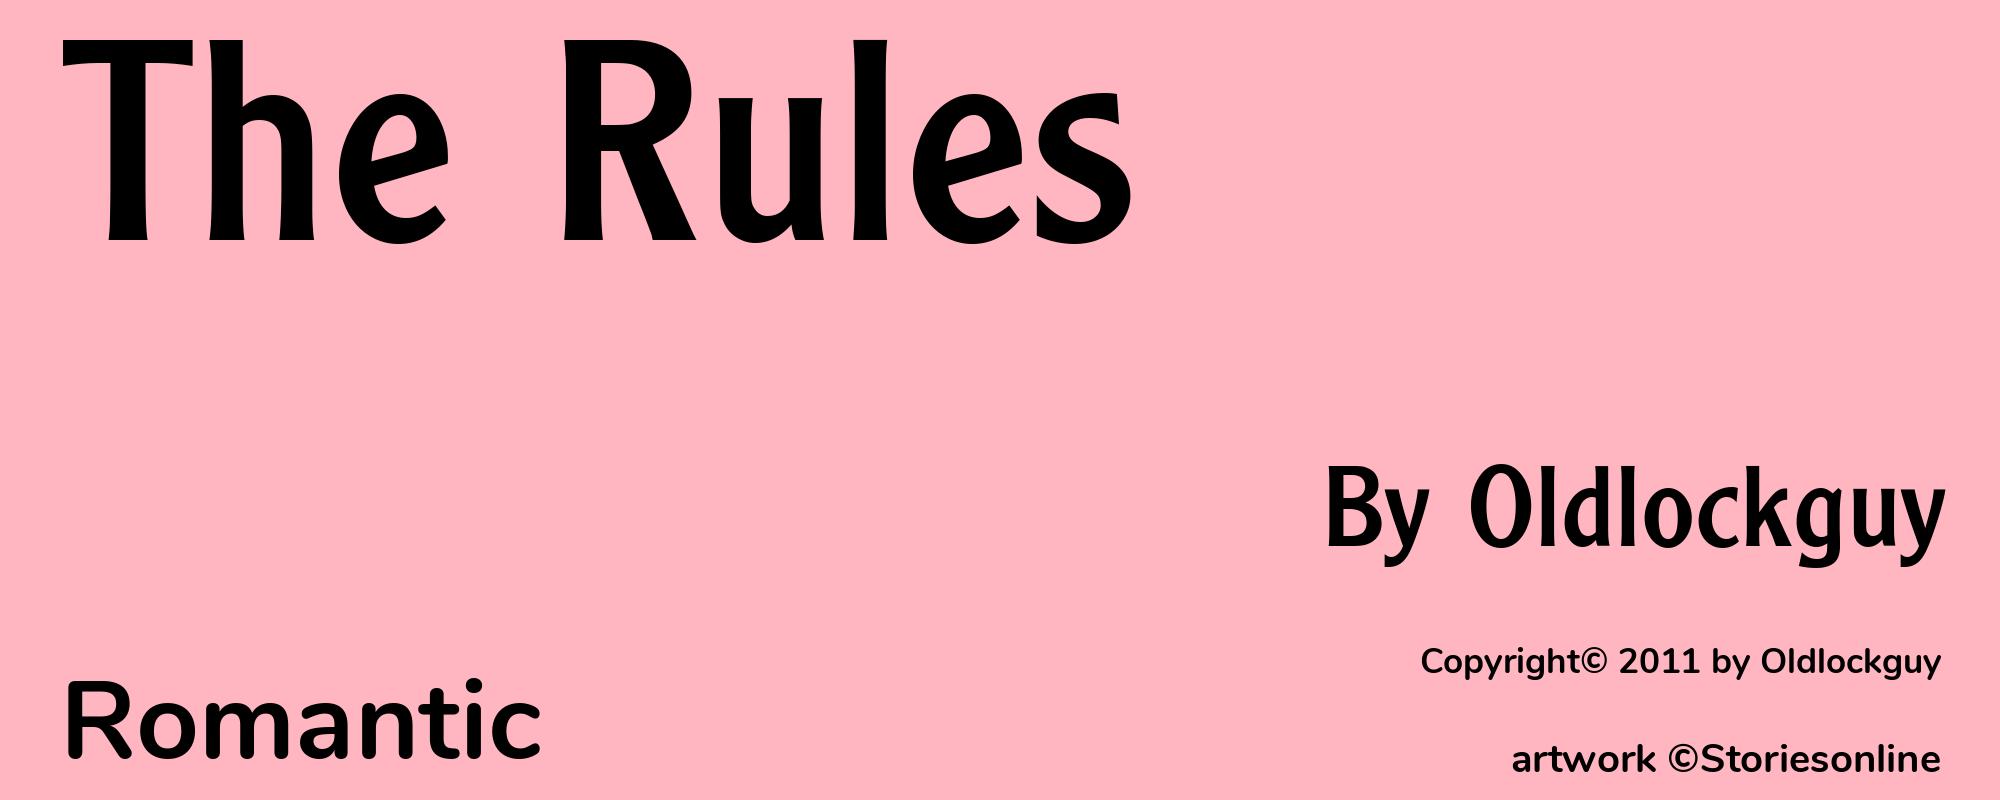 The Rules - Cover